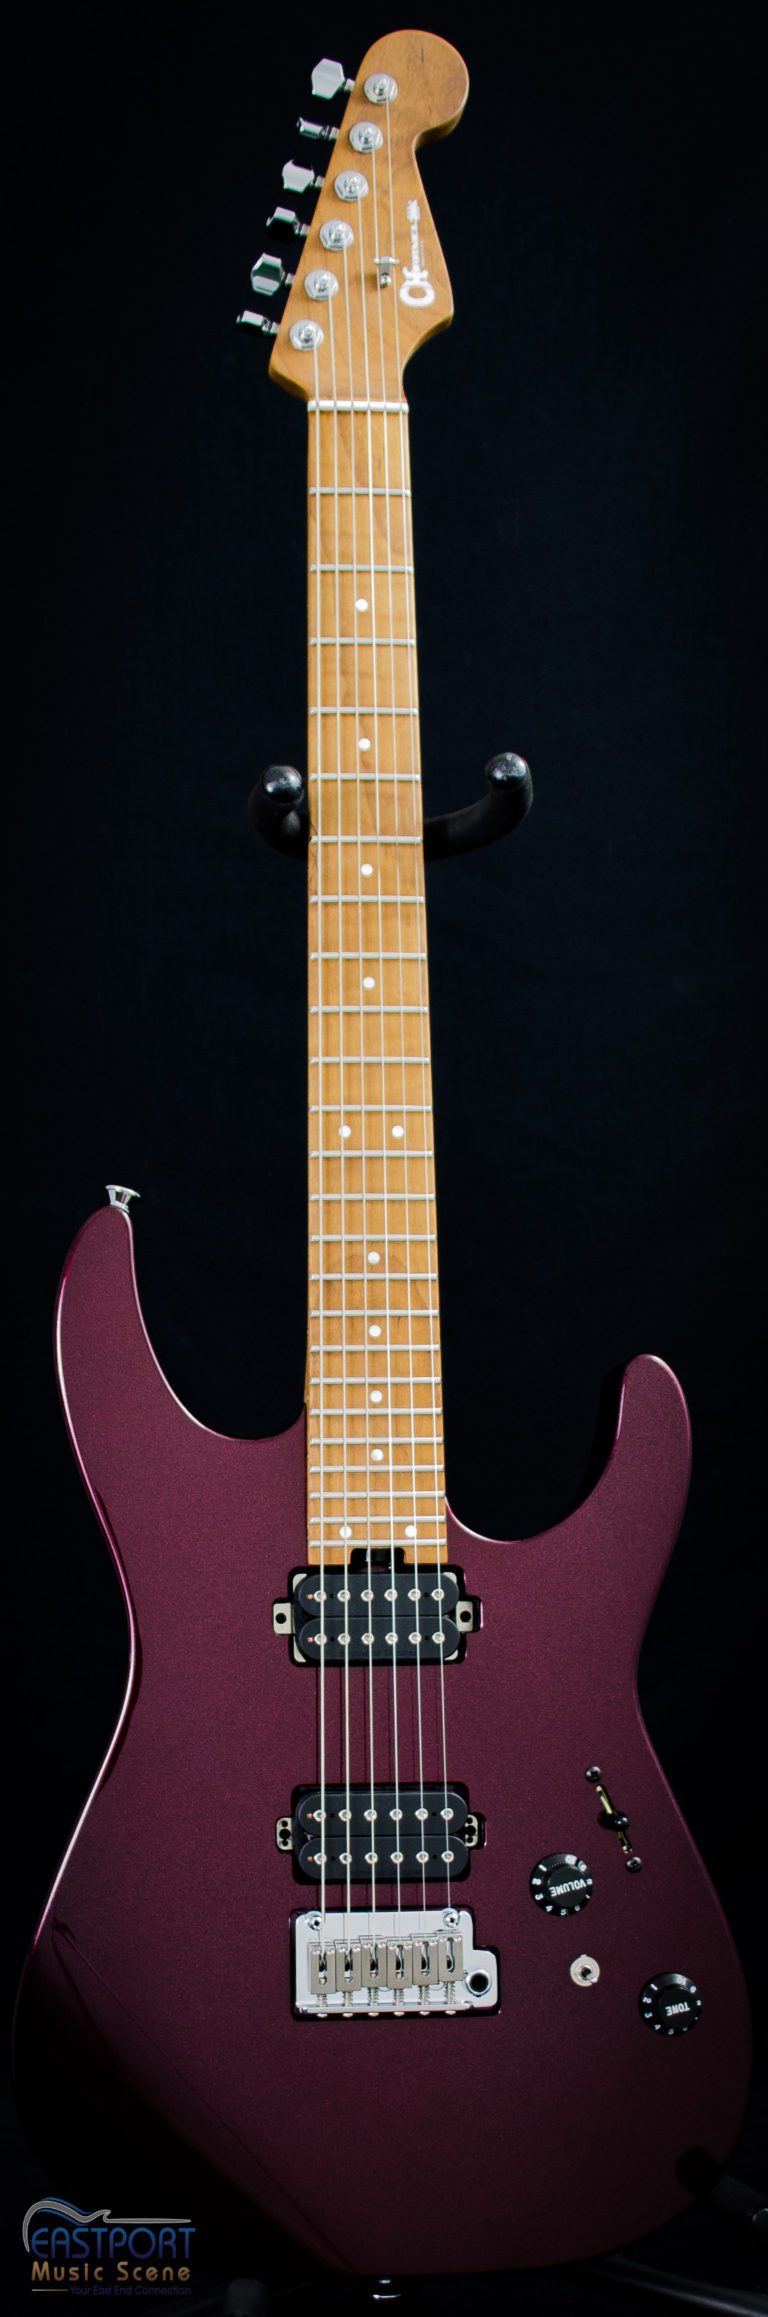 A purple guitar with white dots on the neck